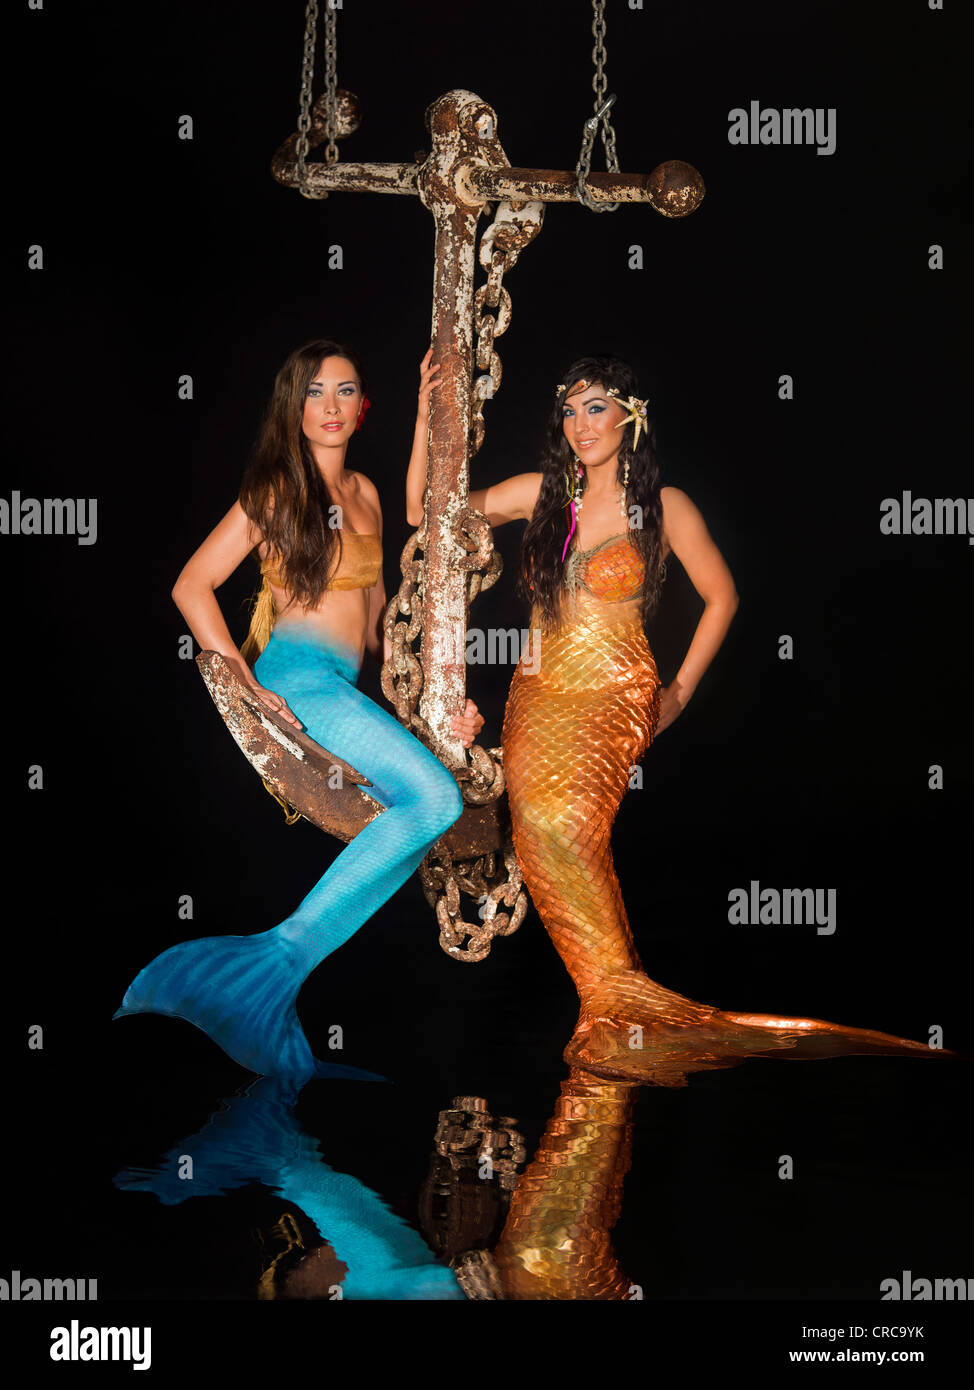 Two young mermaids sitting on a large anchor hanging above a reflection pool. Stock Photo